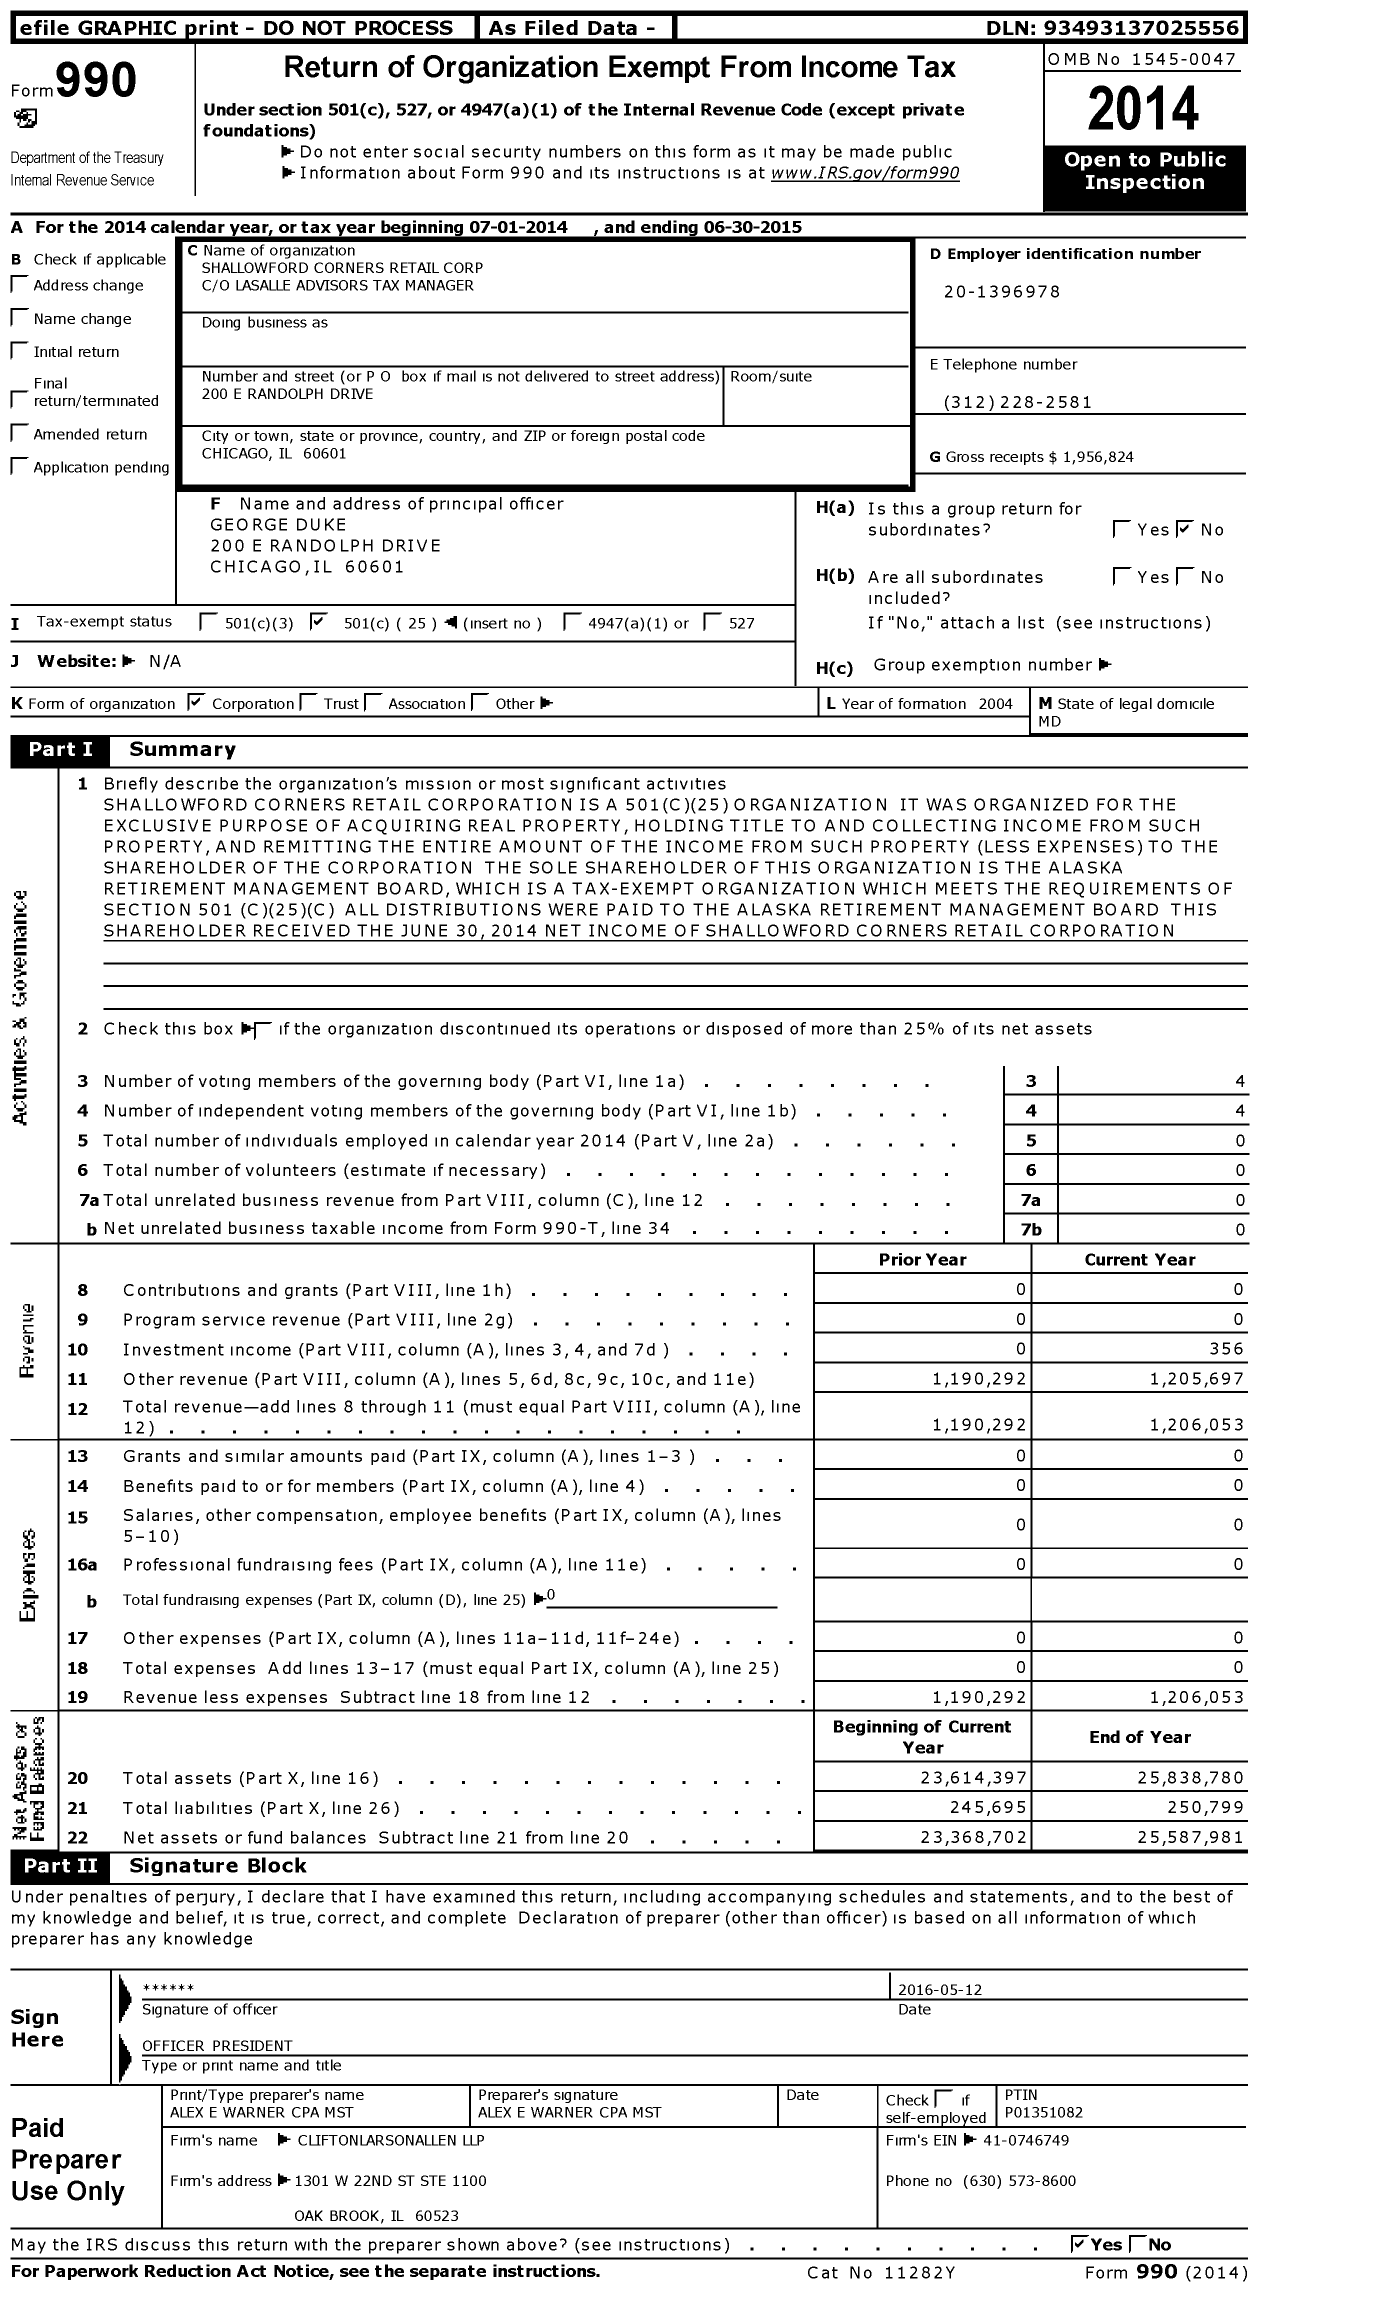 Image of first page of 2014 Form 990O for Shallowford Corners Retail Corporation